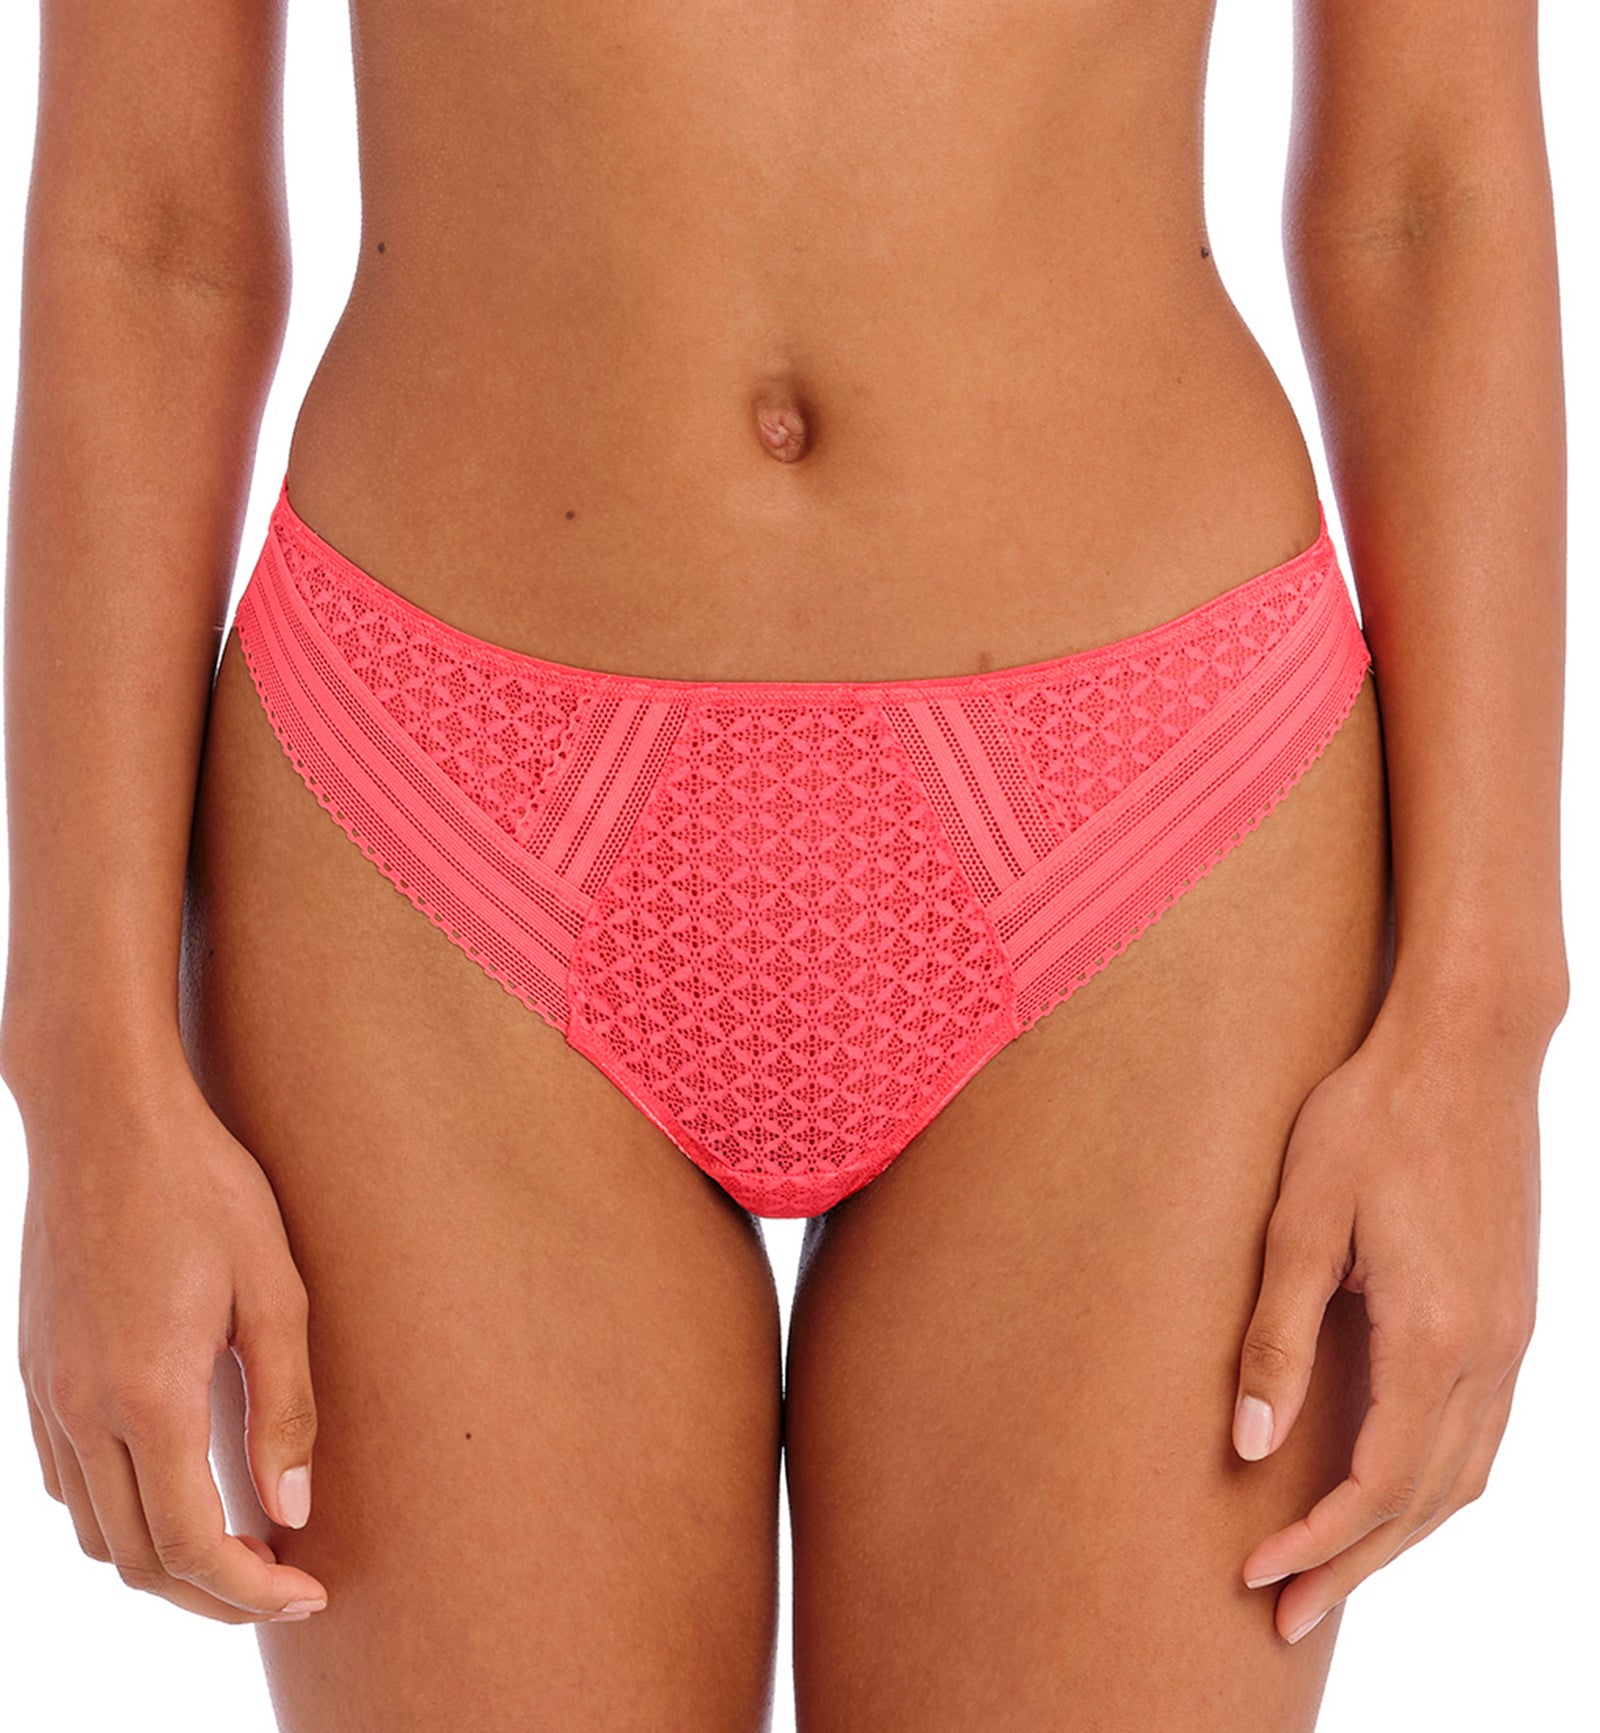 Freya Viva Matching Brazilian Panty (5647),XS,Sunkissed Coral - Sunkissed Coral,XS